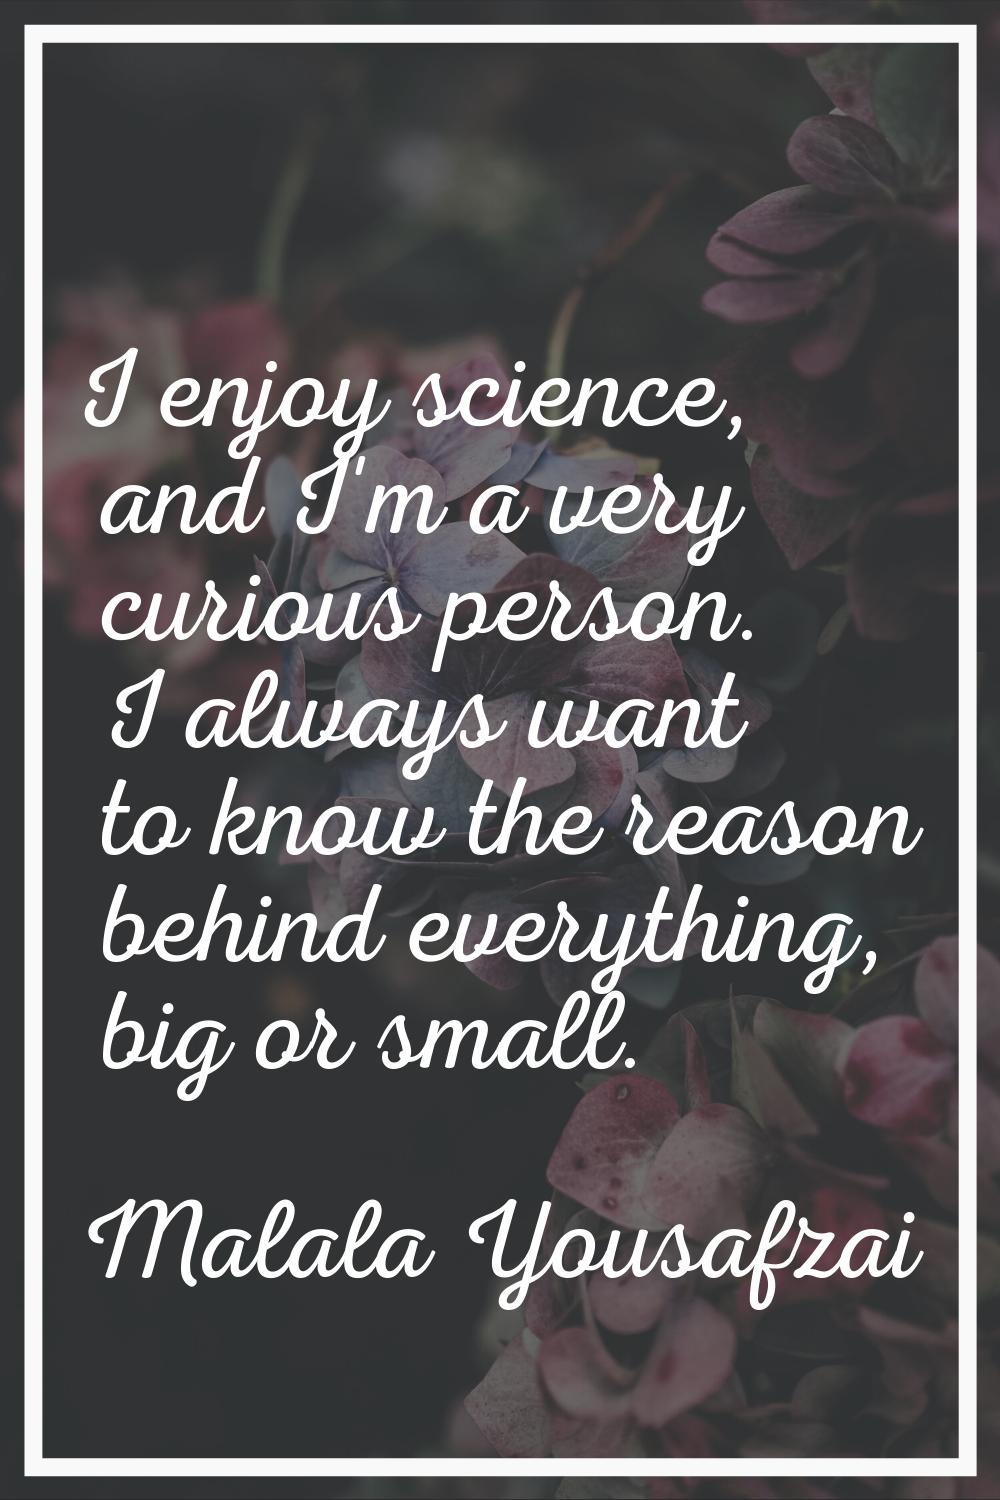 I enjoy science, and I'm a very curious person. I always want to know the reason behind everything,